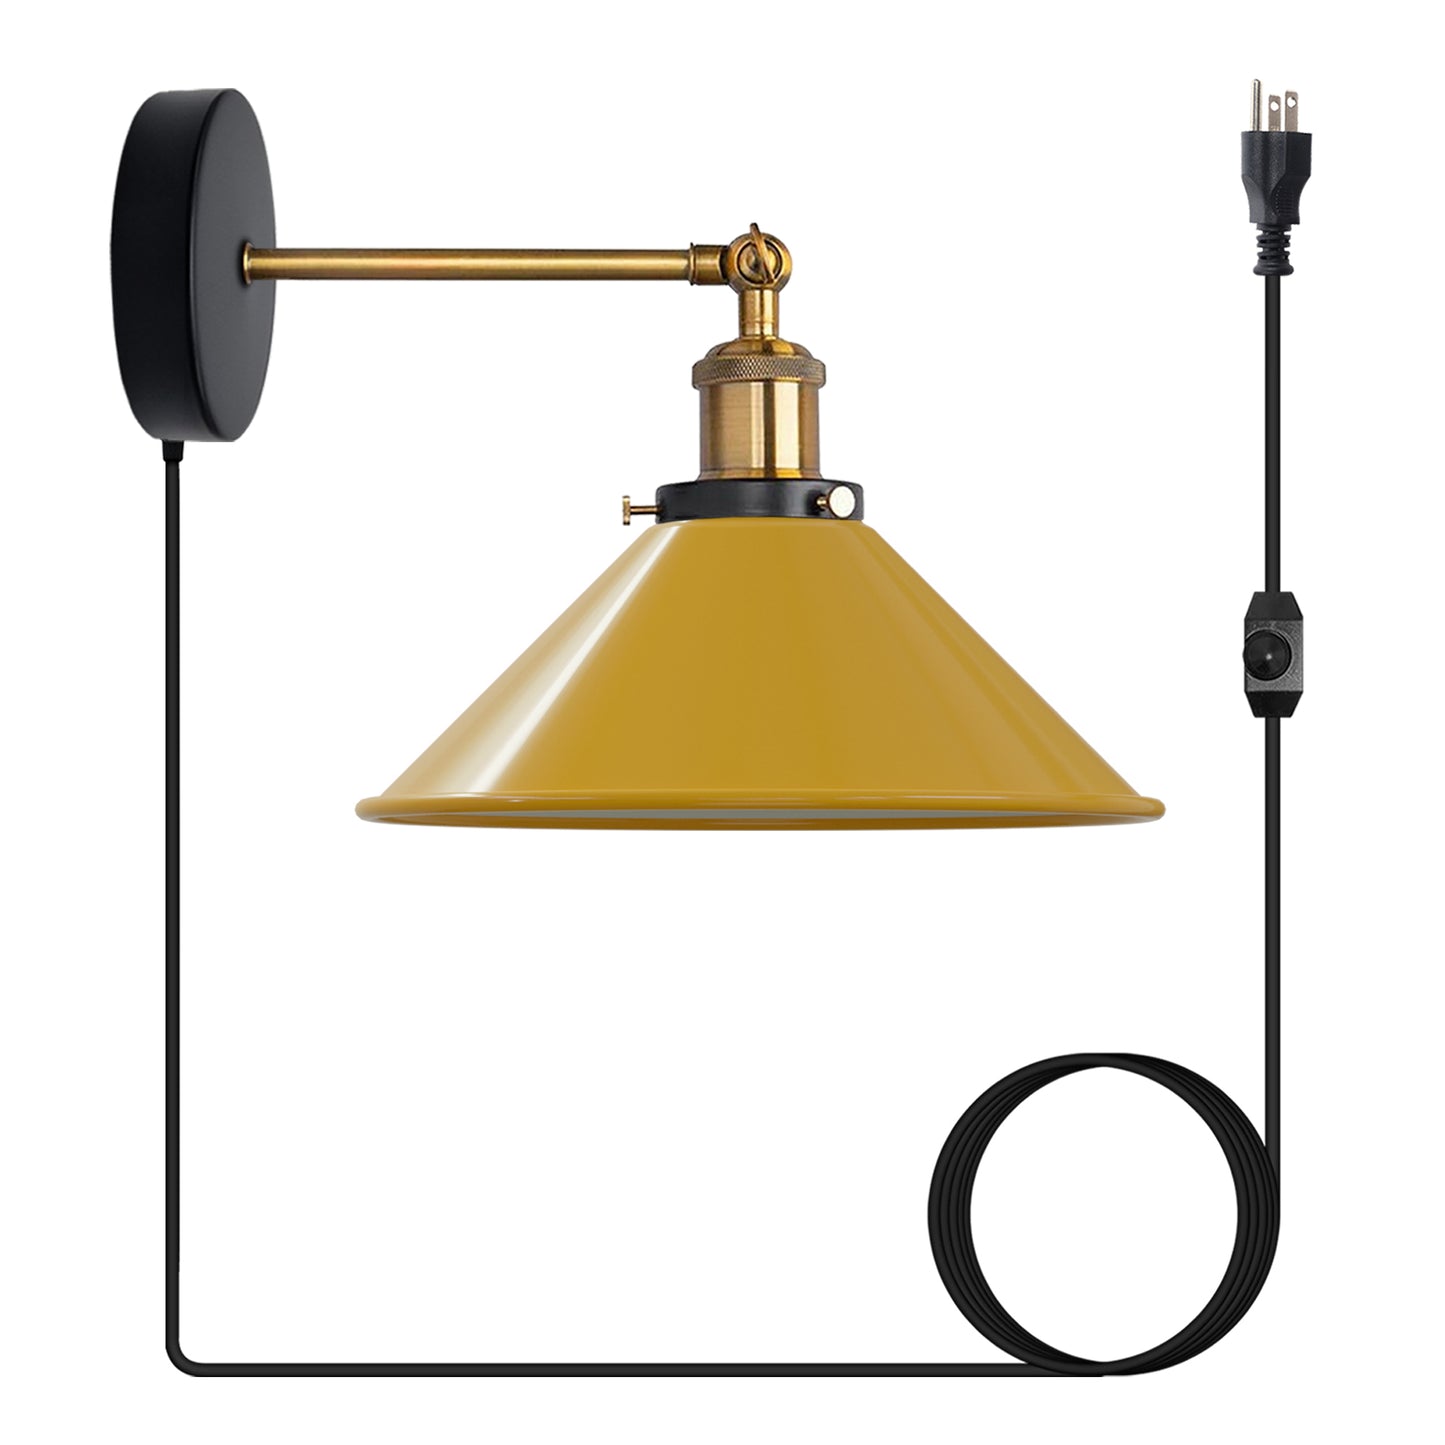 yellow  Plug-in Wall Light Sconces with Dimmer Switch.JPG